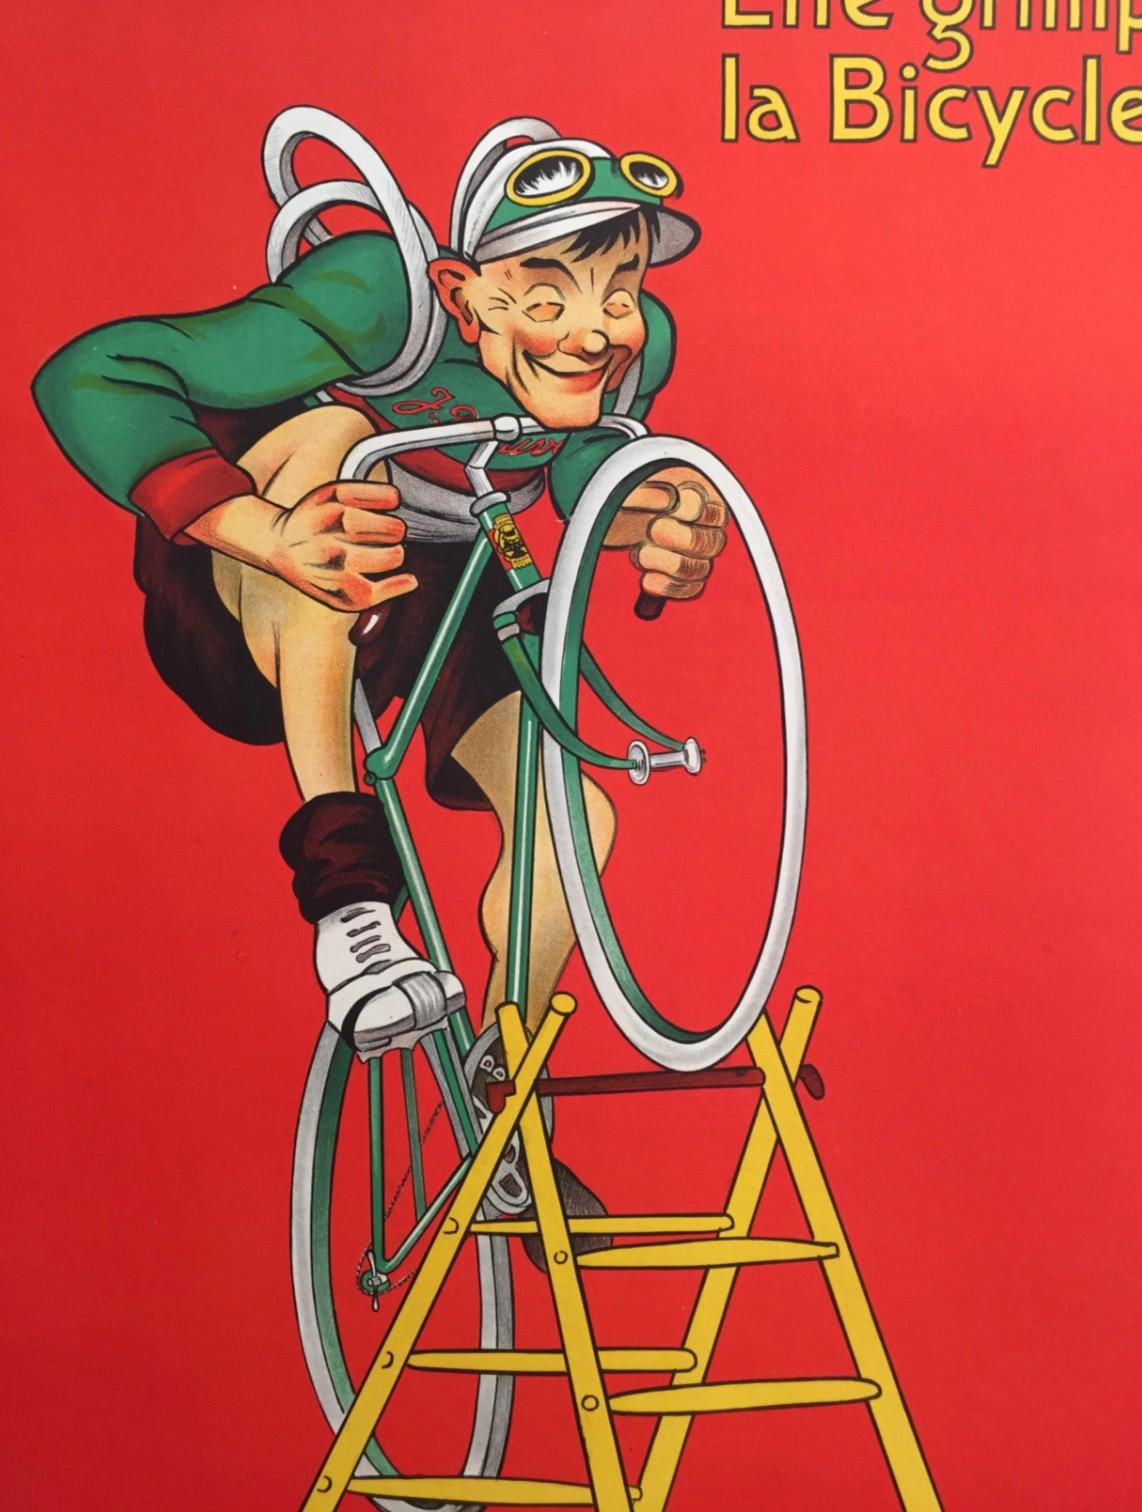 An original poster from 1919, this is a must have for cycling enthusiasts! This poster is a humorous depiction of a man trying to ride his bike up a ladder without the spokes. Colours are vibrant, the poster has been linen backed for preservation.